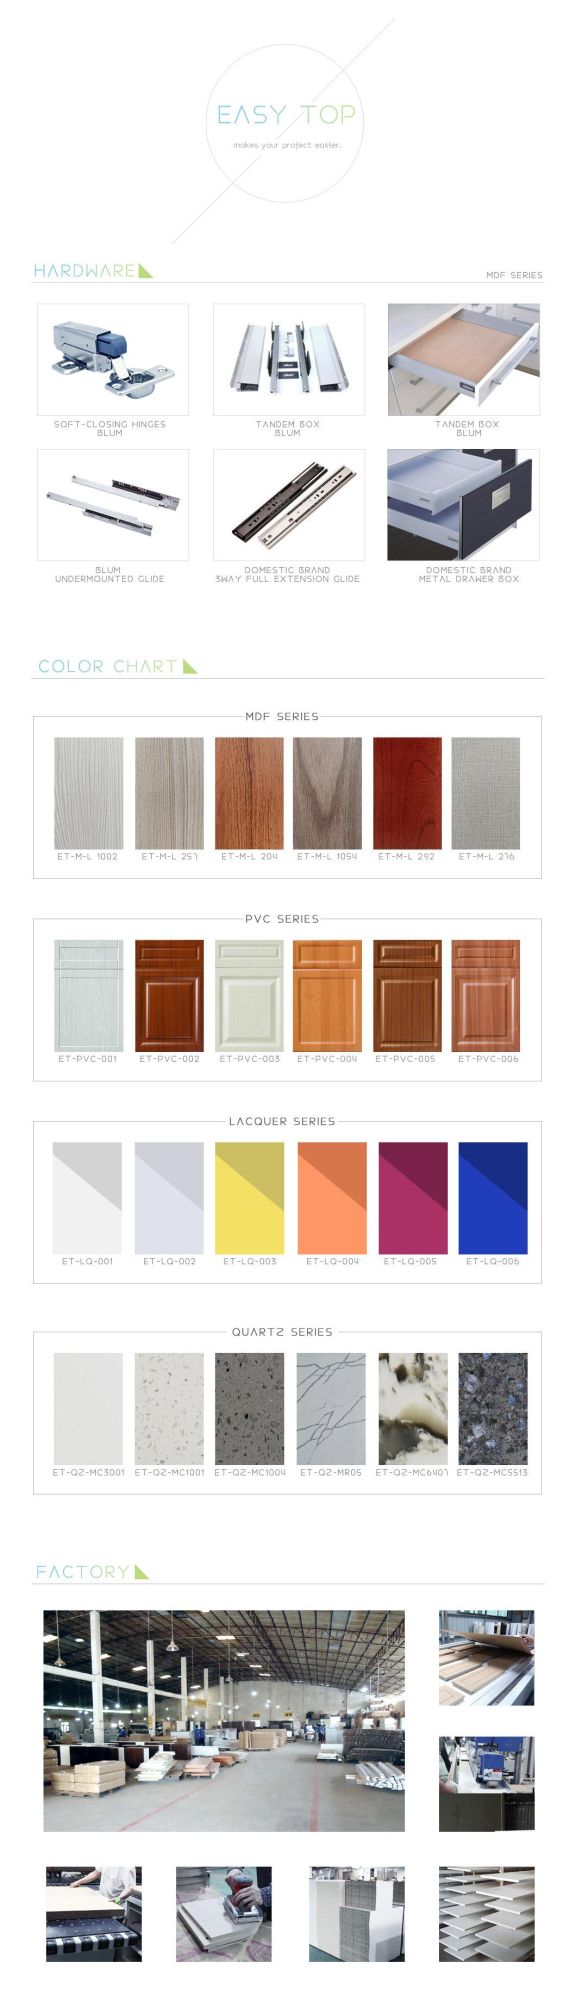 European Design Cabinet Customized Flat Pack White Pantry Waterfall Island Kitchen Cabinets